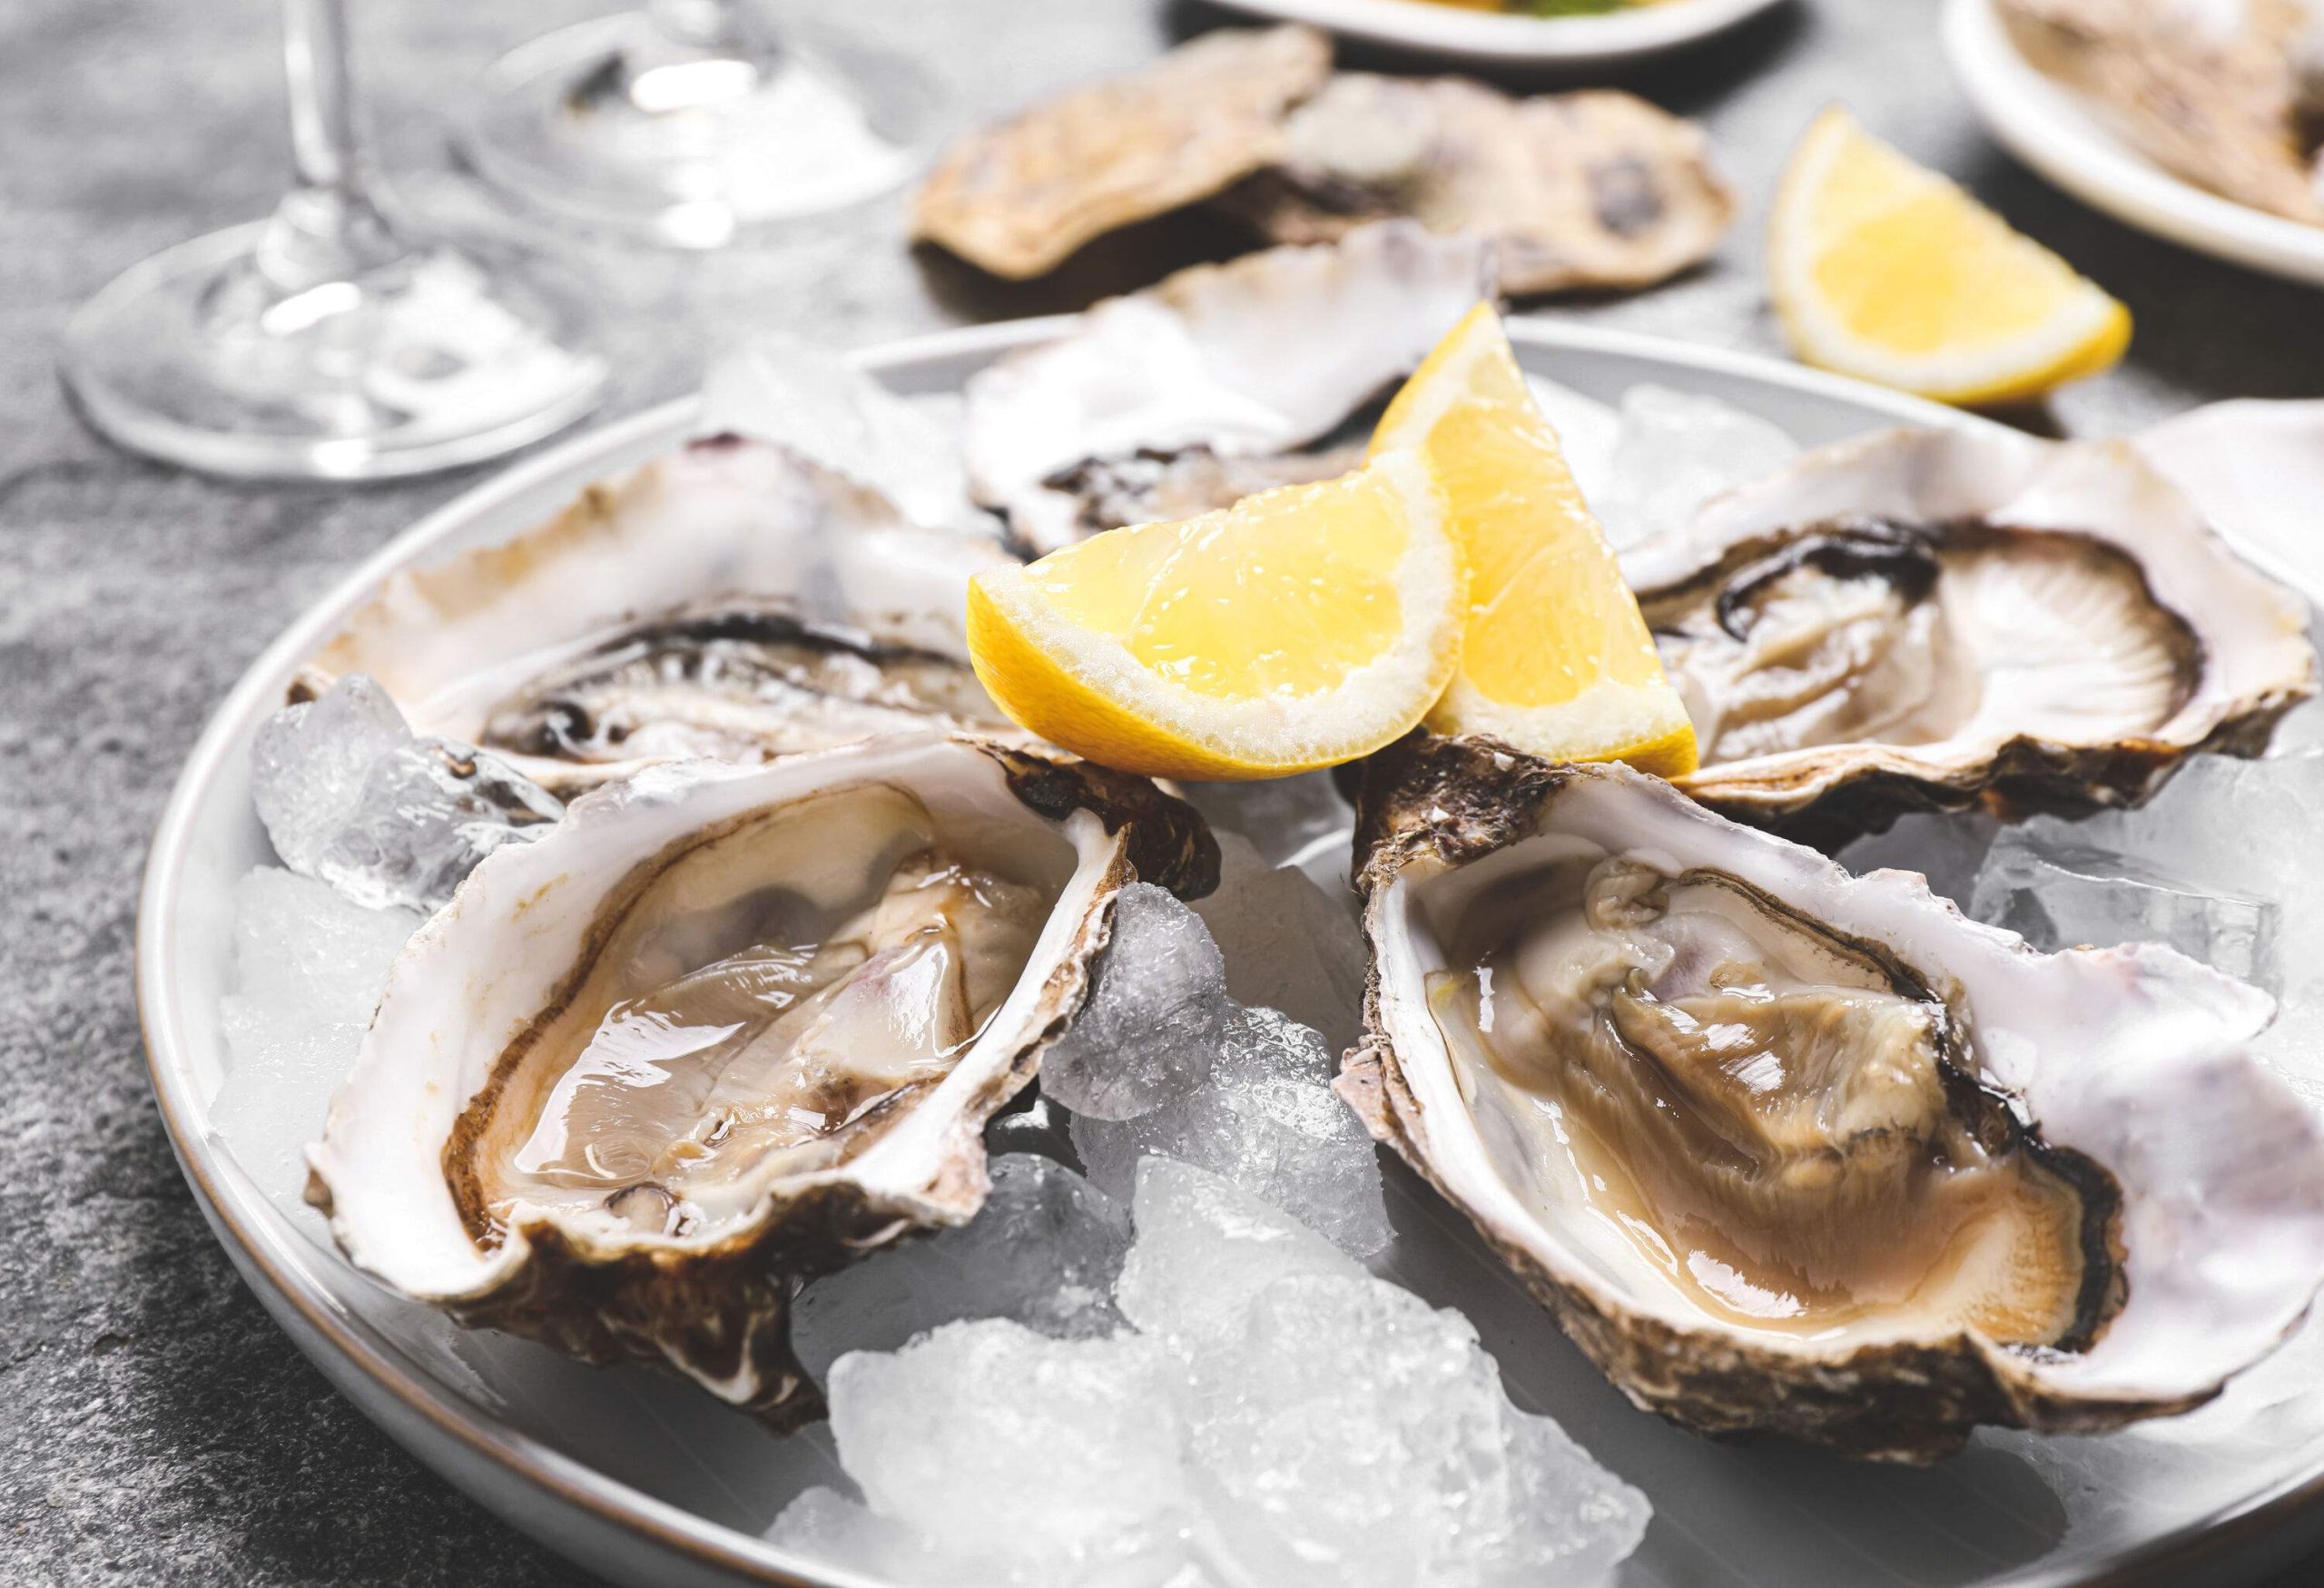 A platter of crushed ice with fresh oysters and lemon slices.